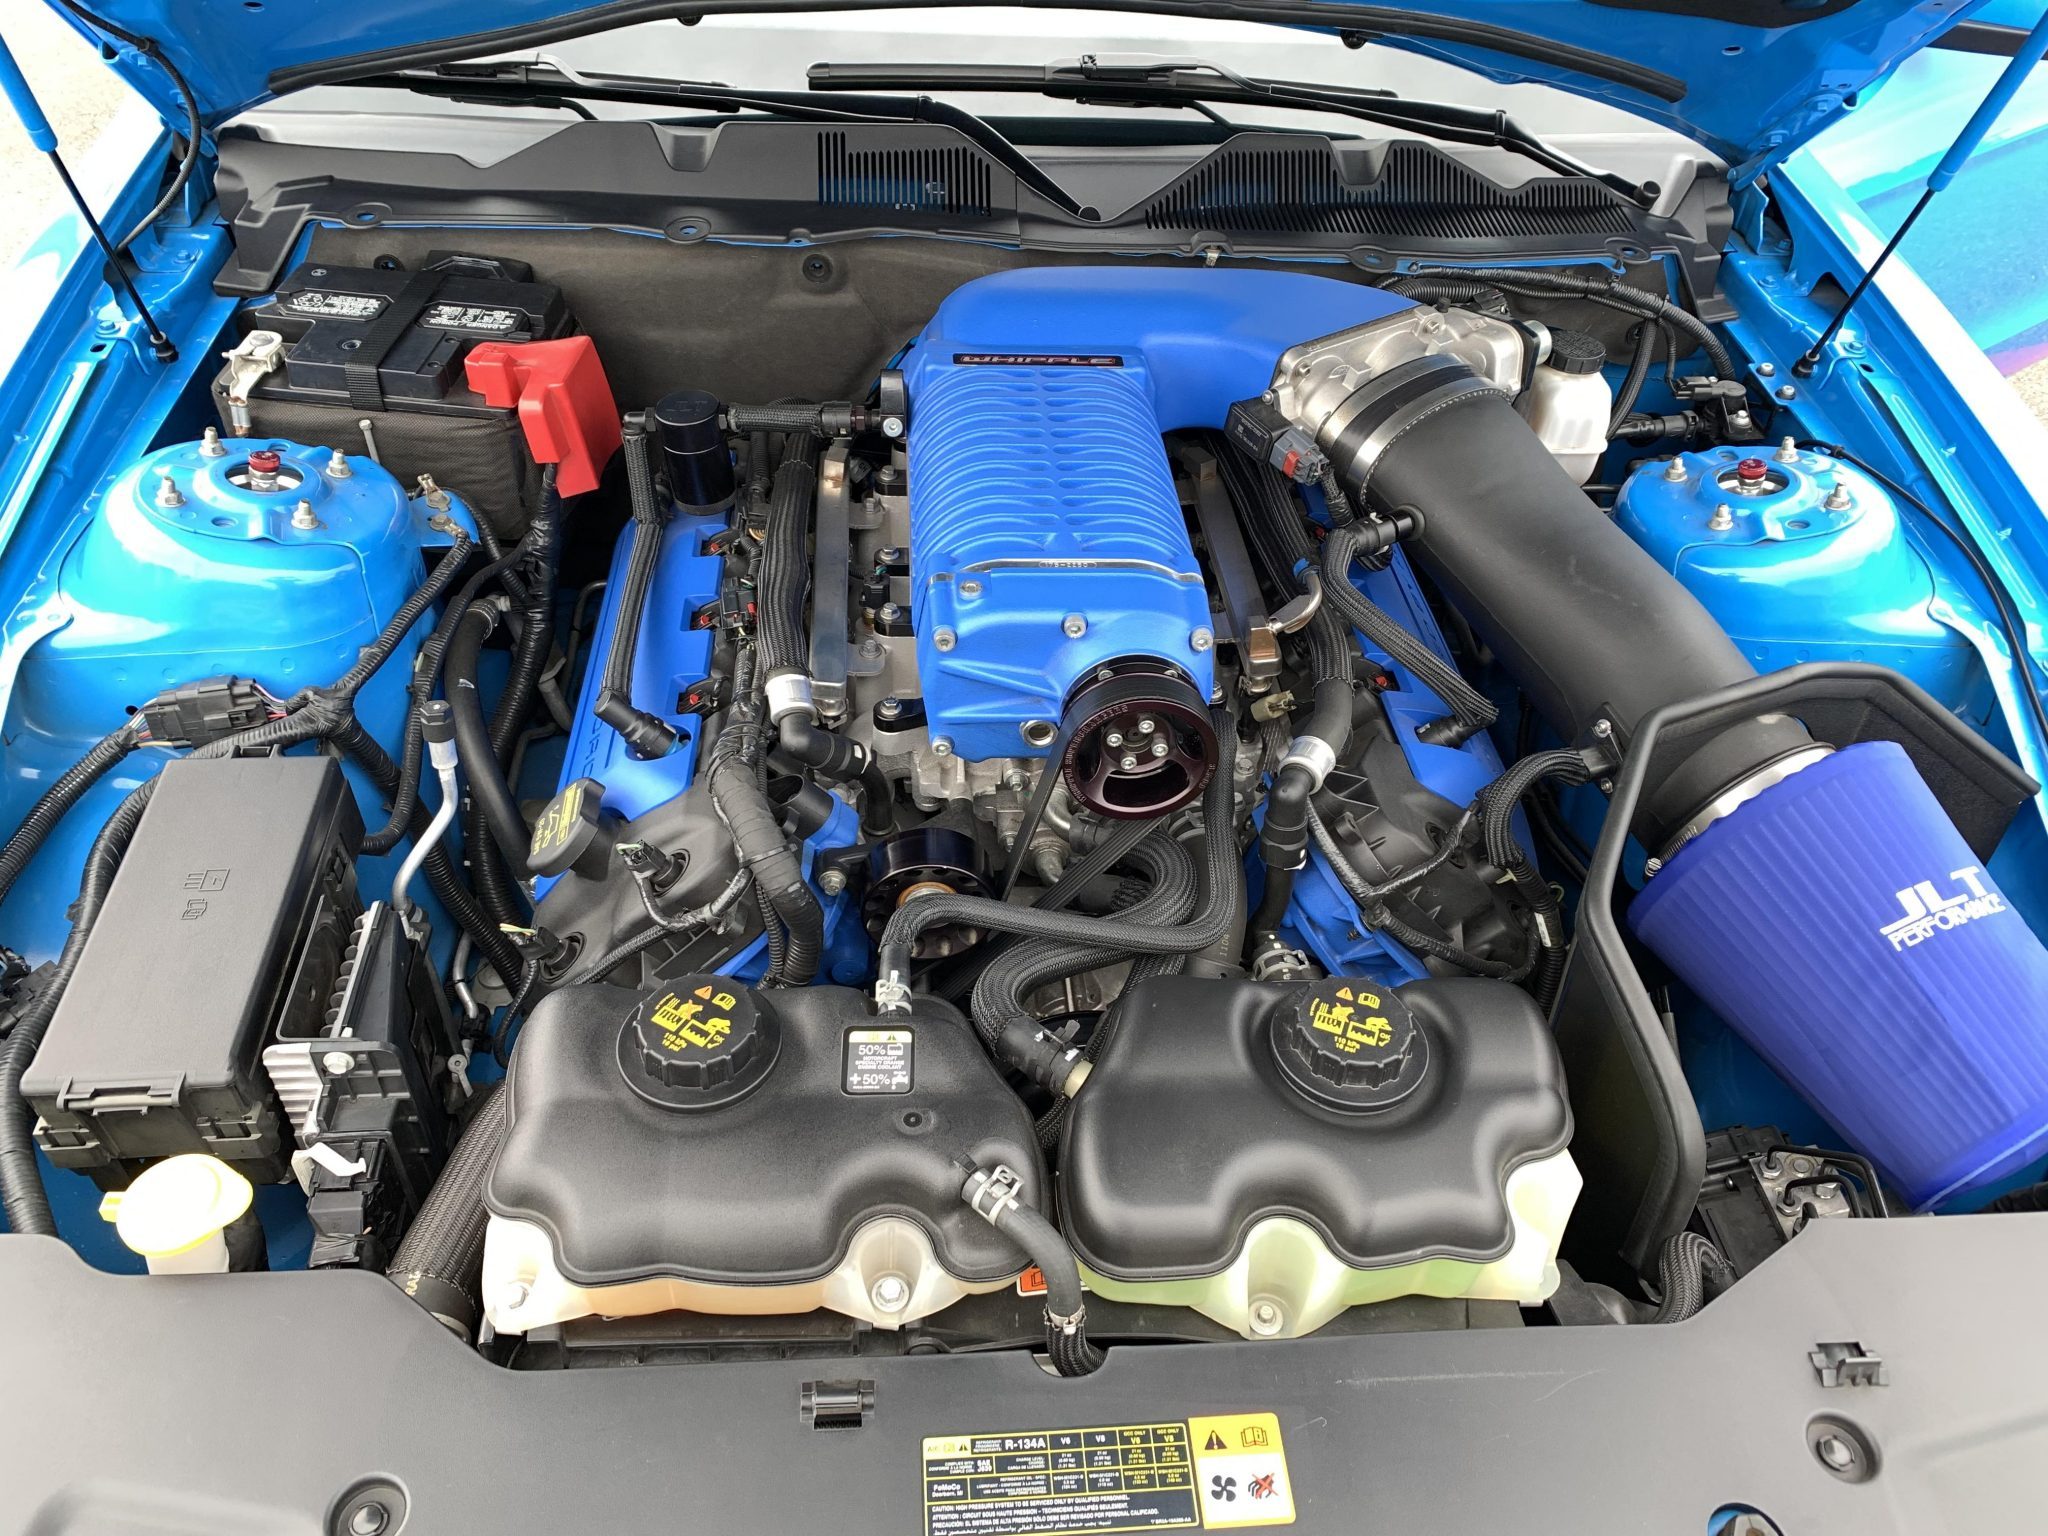 Supercharged engine